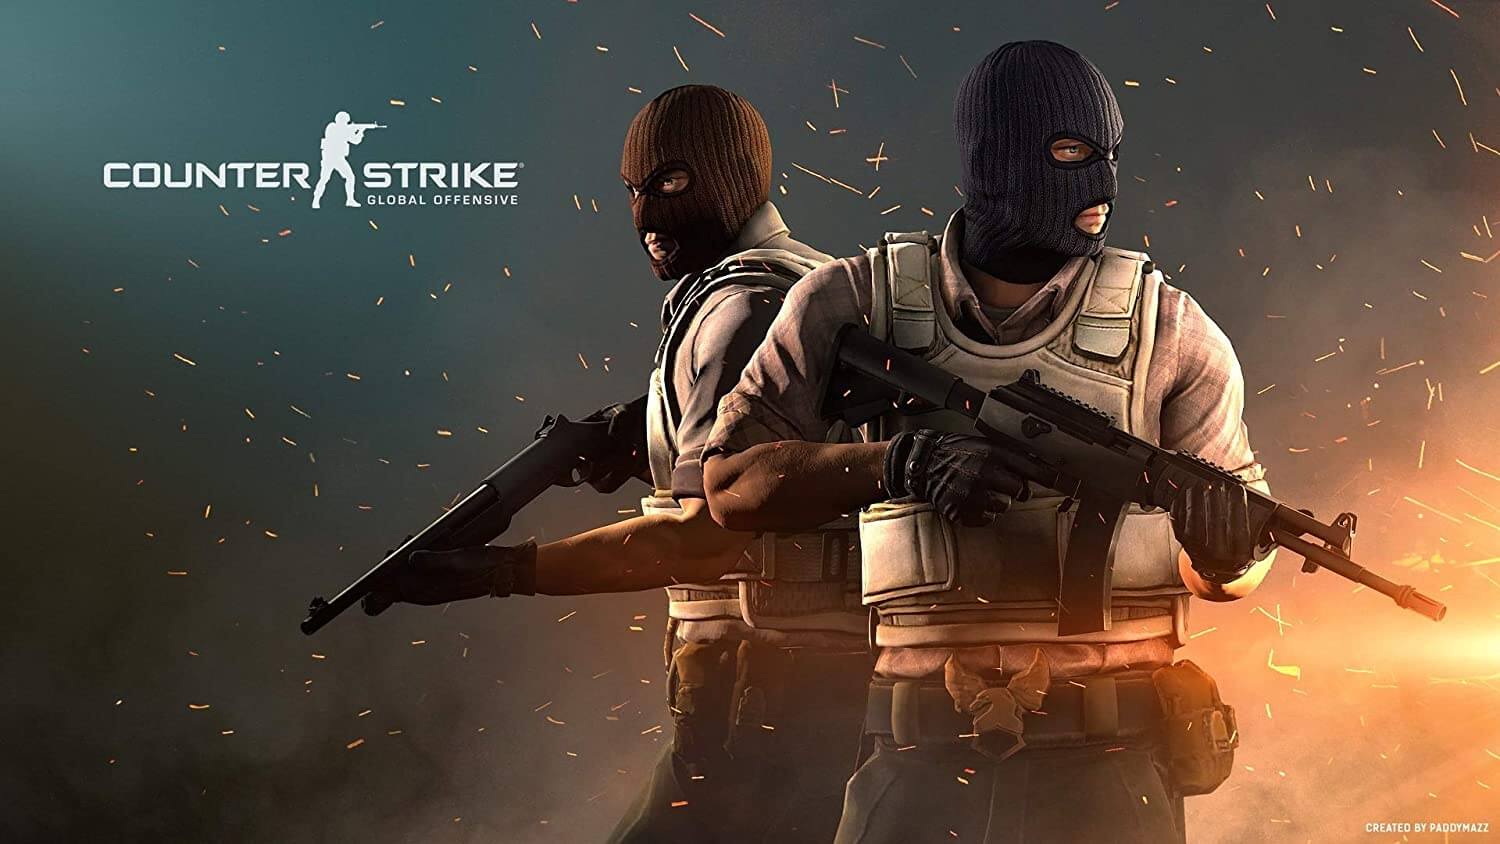 How to Get Free Skins In Counter-Strike: Global Offensive